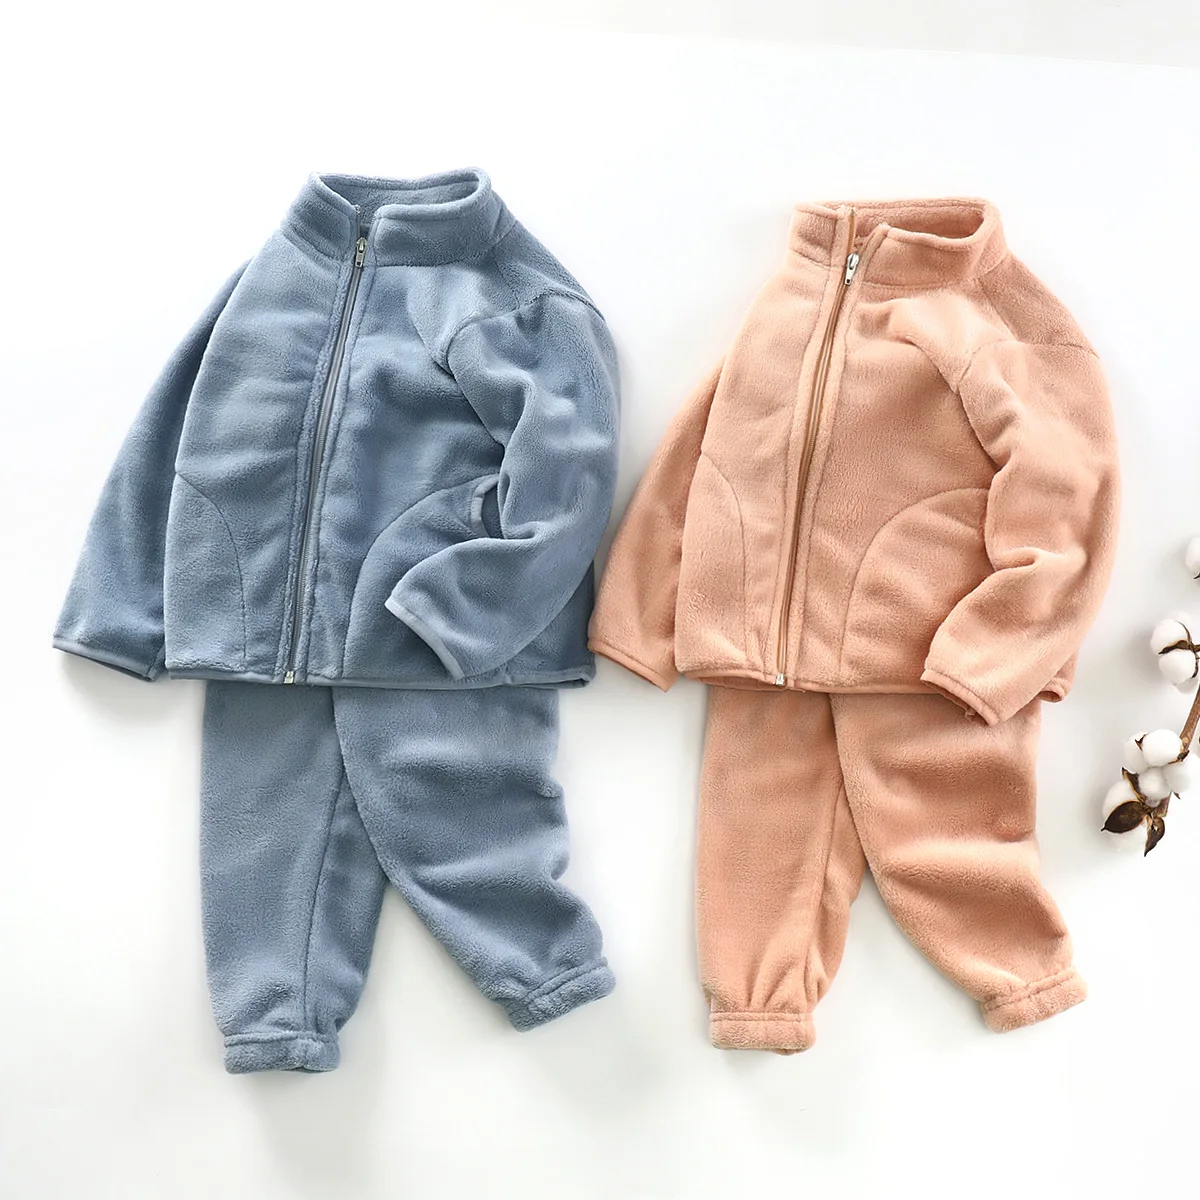 

2020 Warm pants suit boys and girls autumn and winter cashmere thickening home casual pajamas coral velvet two new pieces, Pink, gray, blue, red, khaki